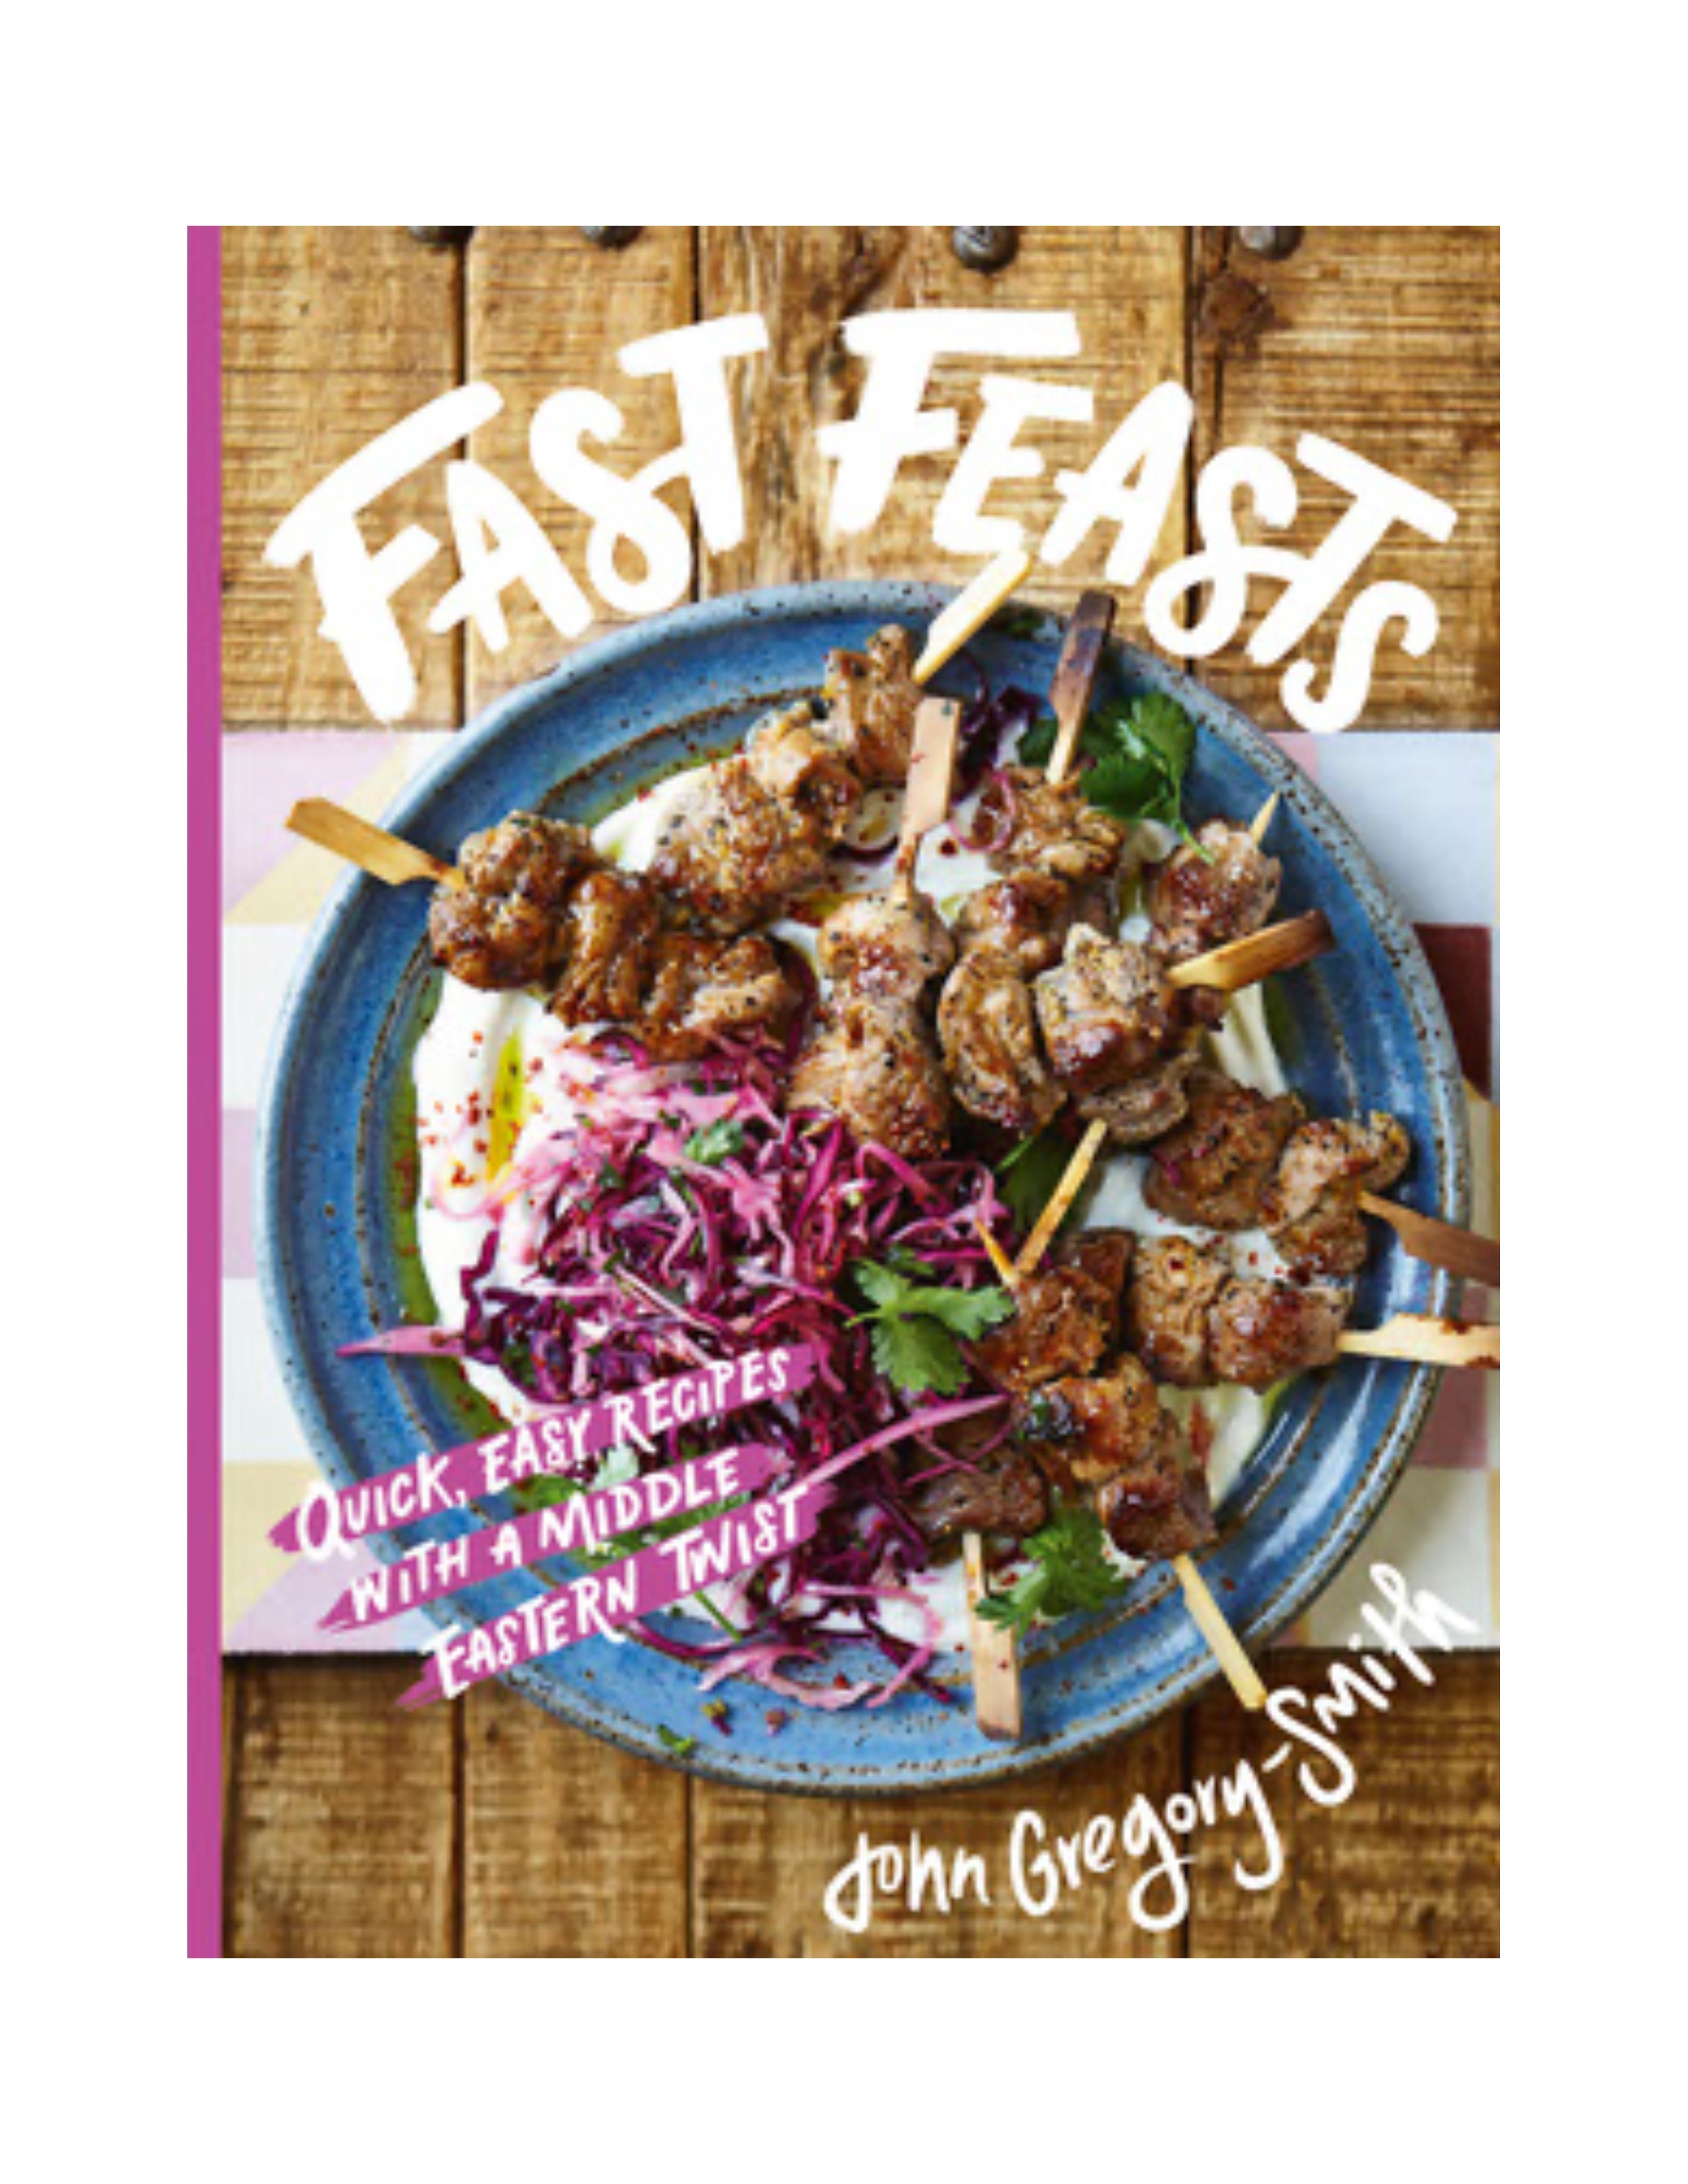 Fast Feasts: Quick, Easy Recipes with a Middle Eastern Twist